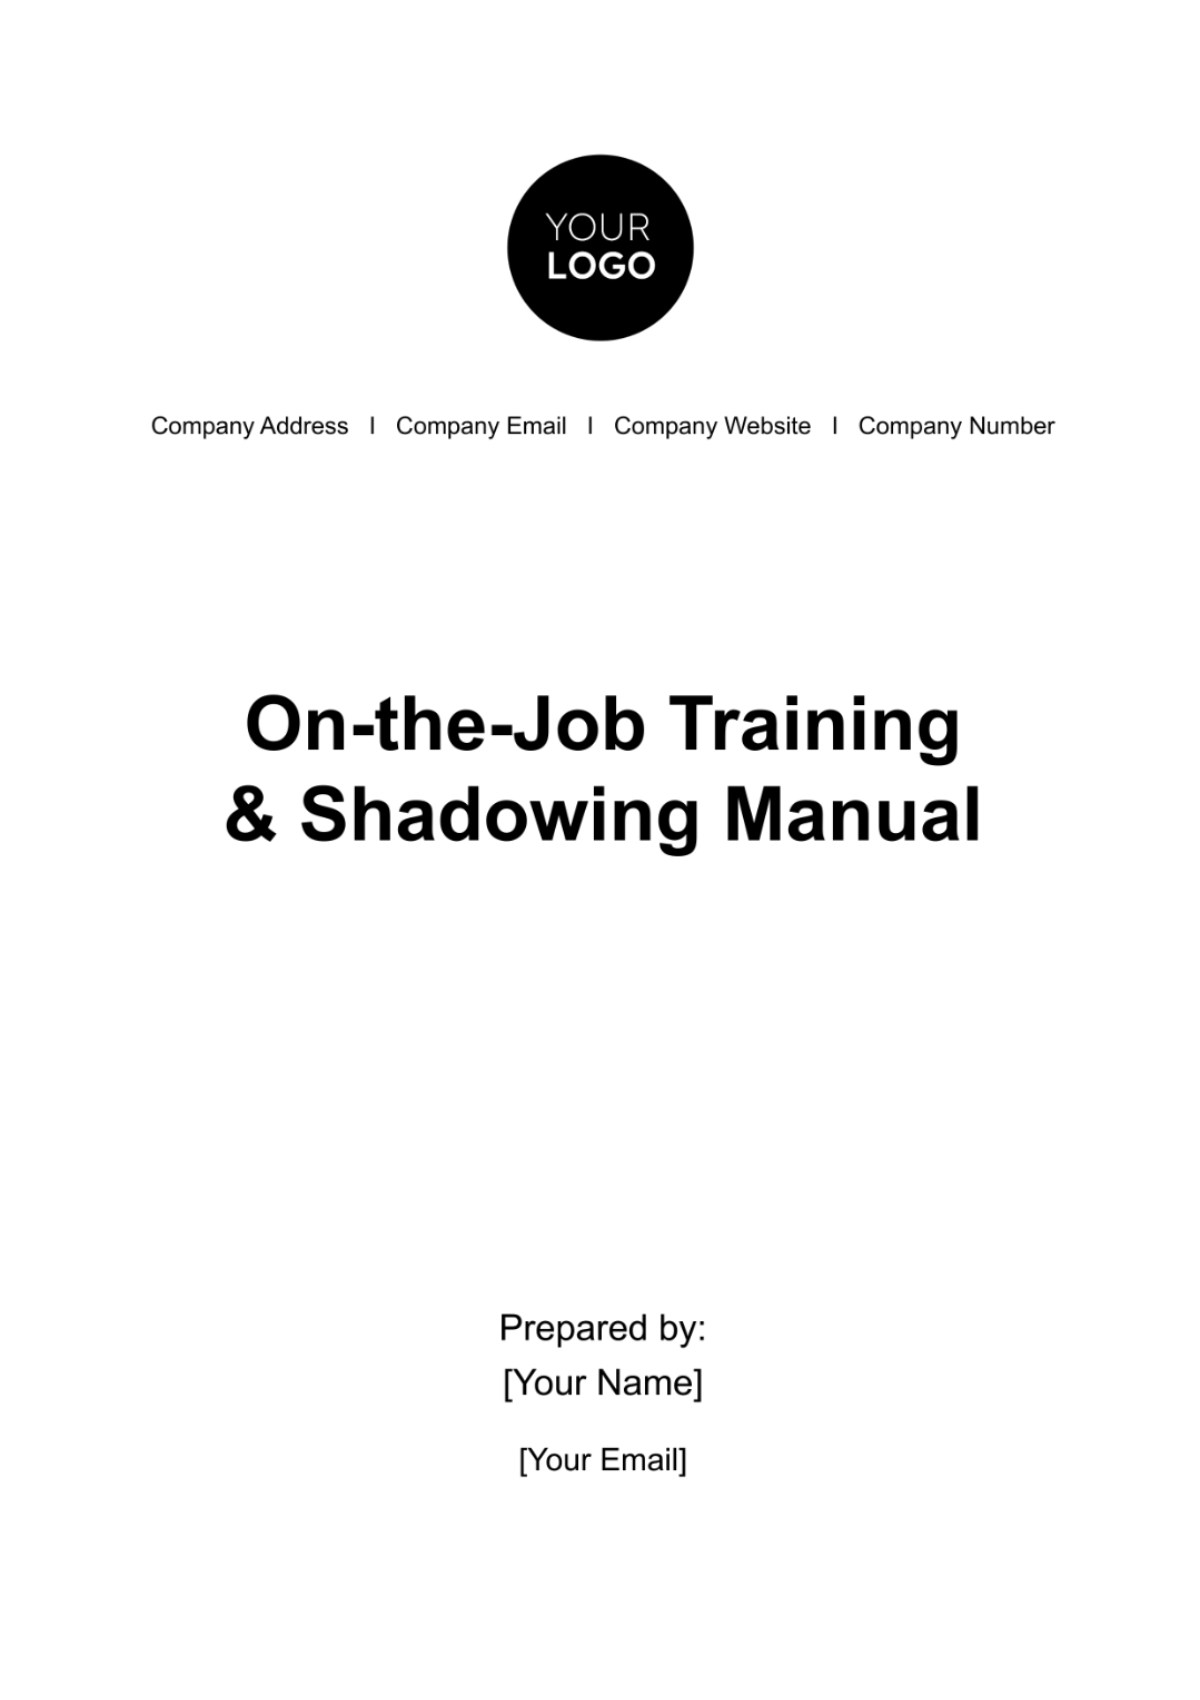 On-the-job Training & Shadowing Manual HR Template